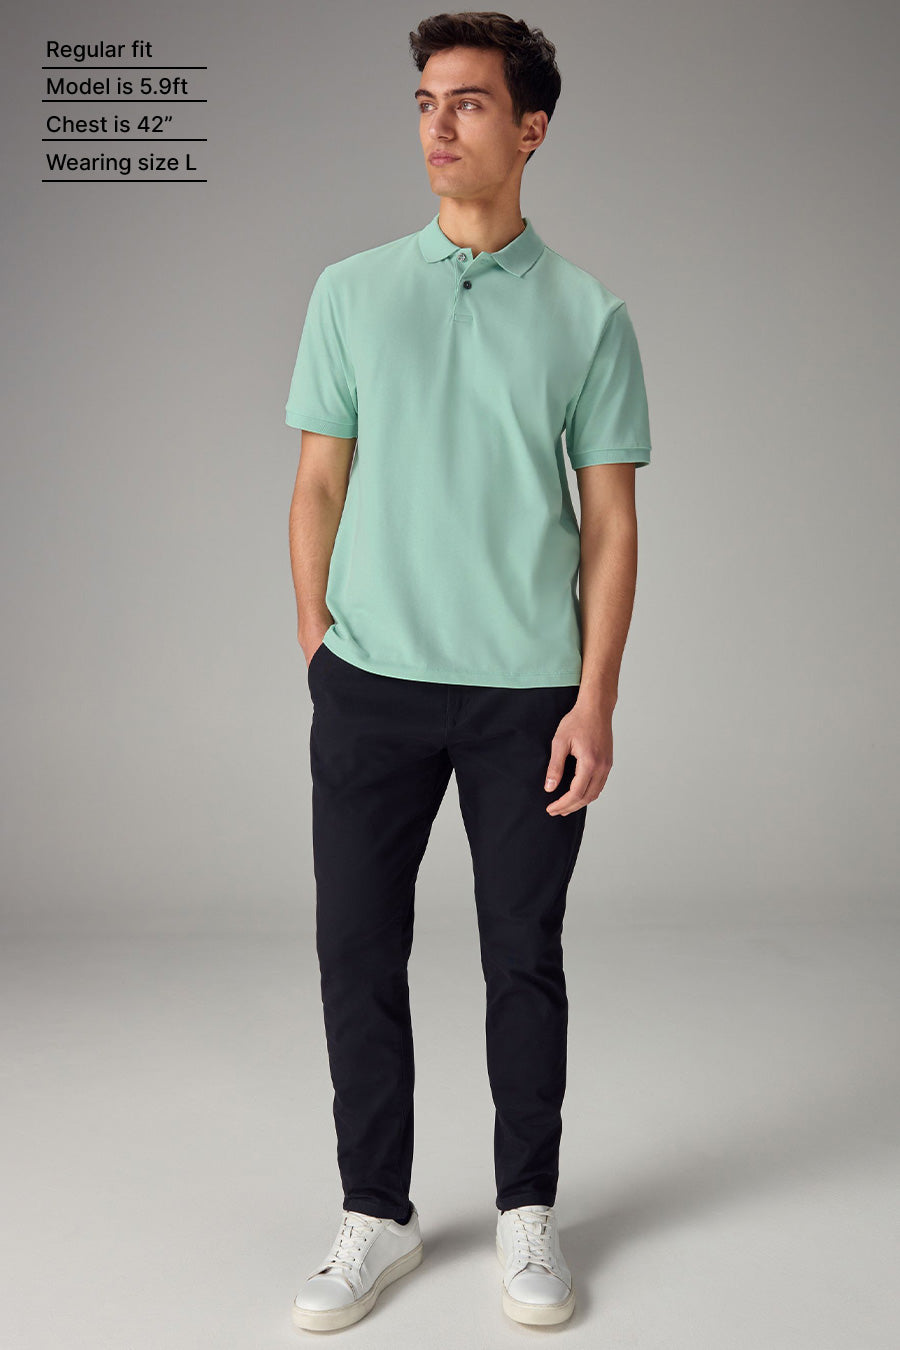 Classic Polo in Teal